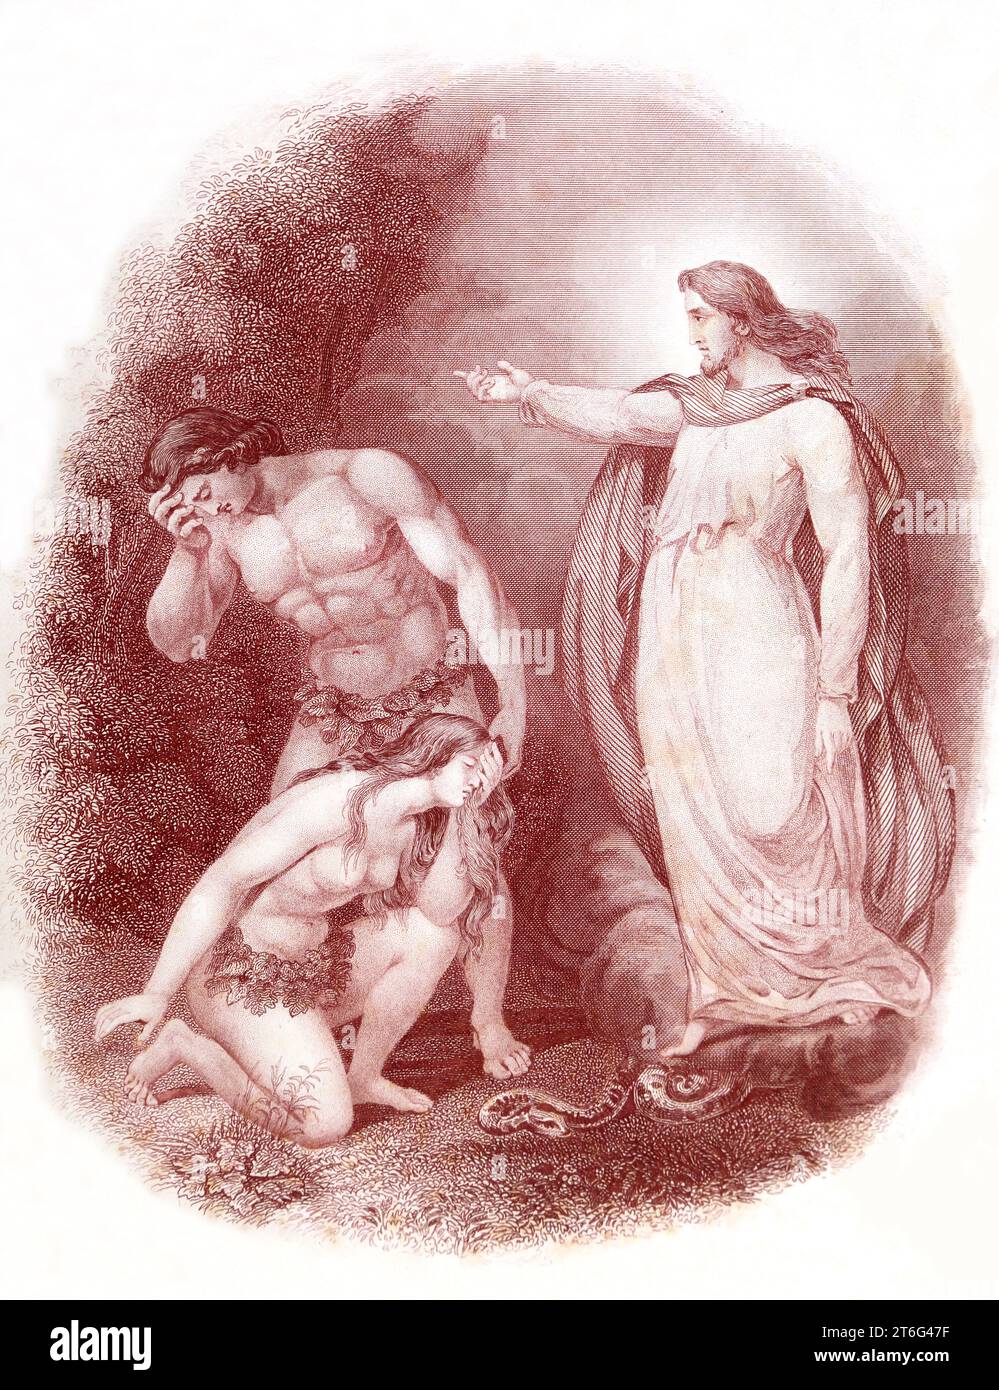 Illustration of the Lord God Confronting Adam and Eve after they had Eaten the Forbidden Fruit - 'Hast Thou Eaten of the tree Whereof I Commanded Thee Stock Photo